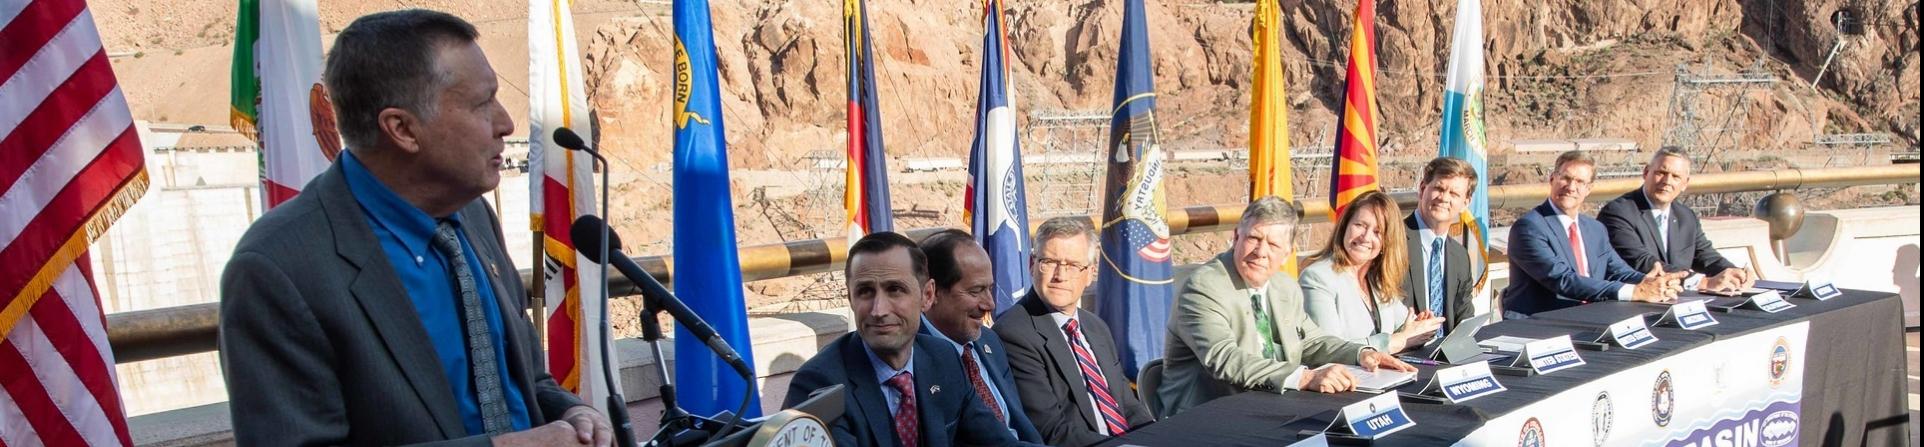 Signing ceremony at Hoover Dam